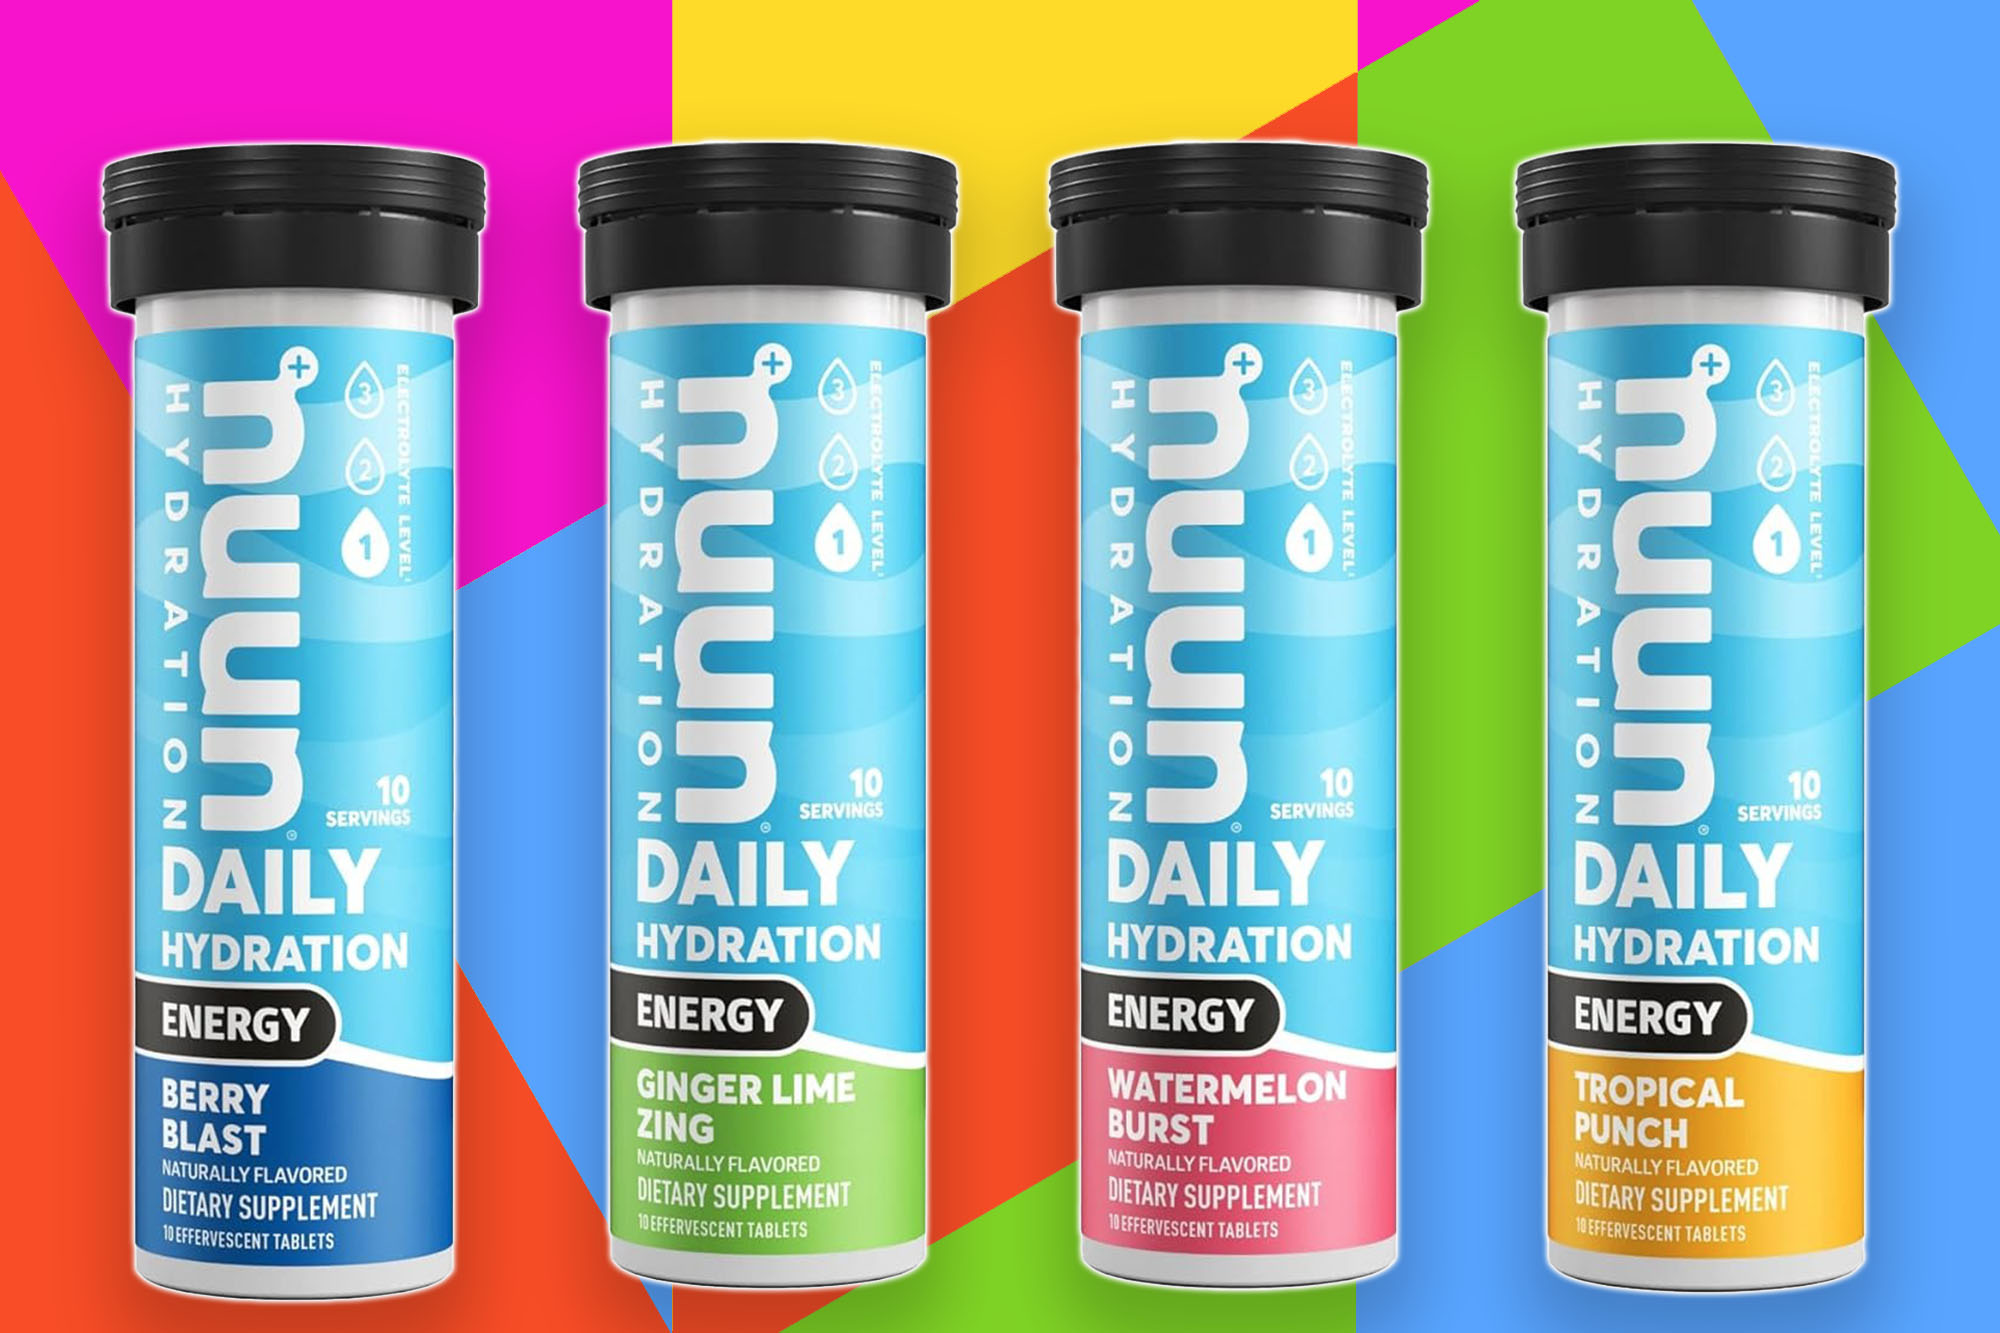 Nuun Energy electrolytes are 41% off on Amazon right in time for summer